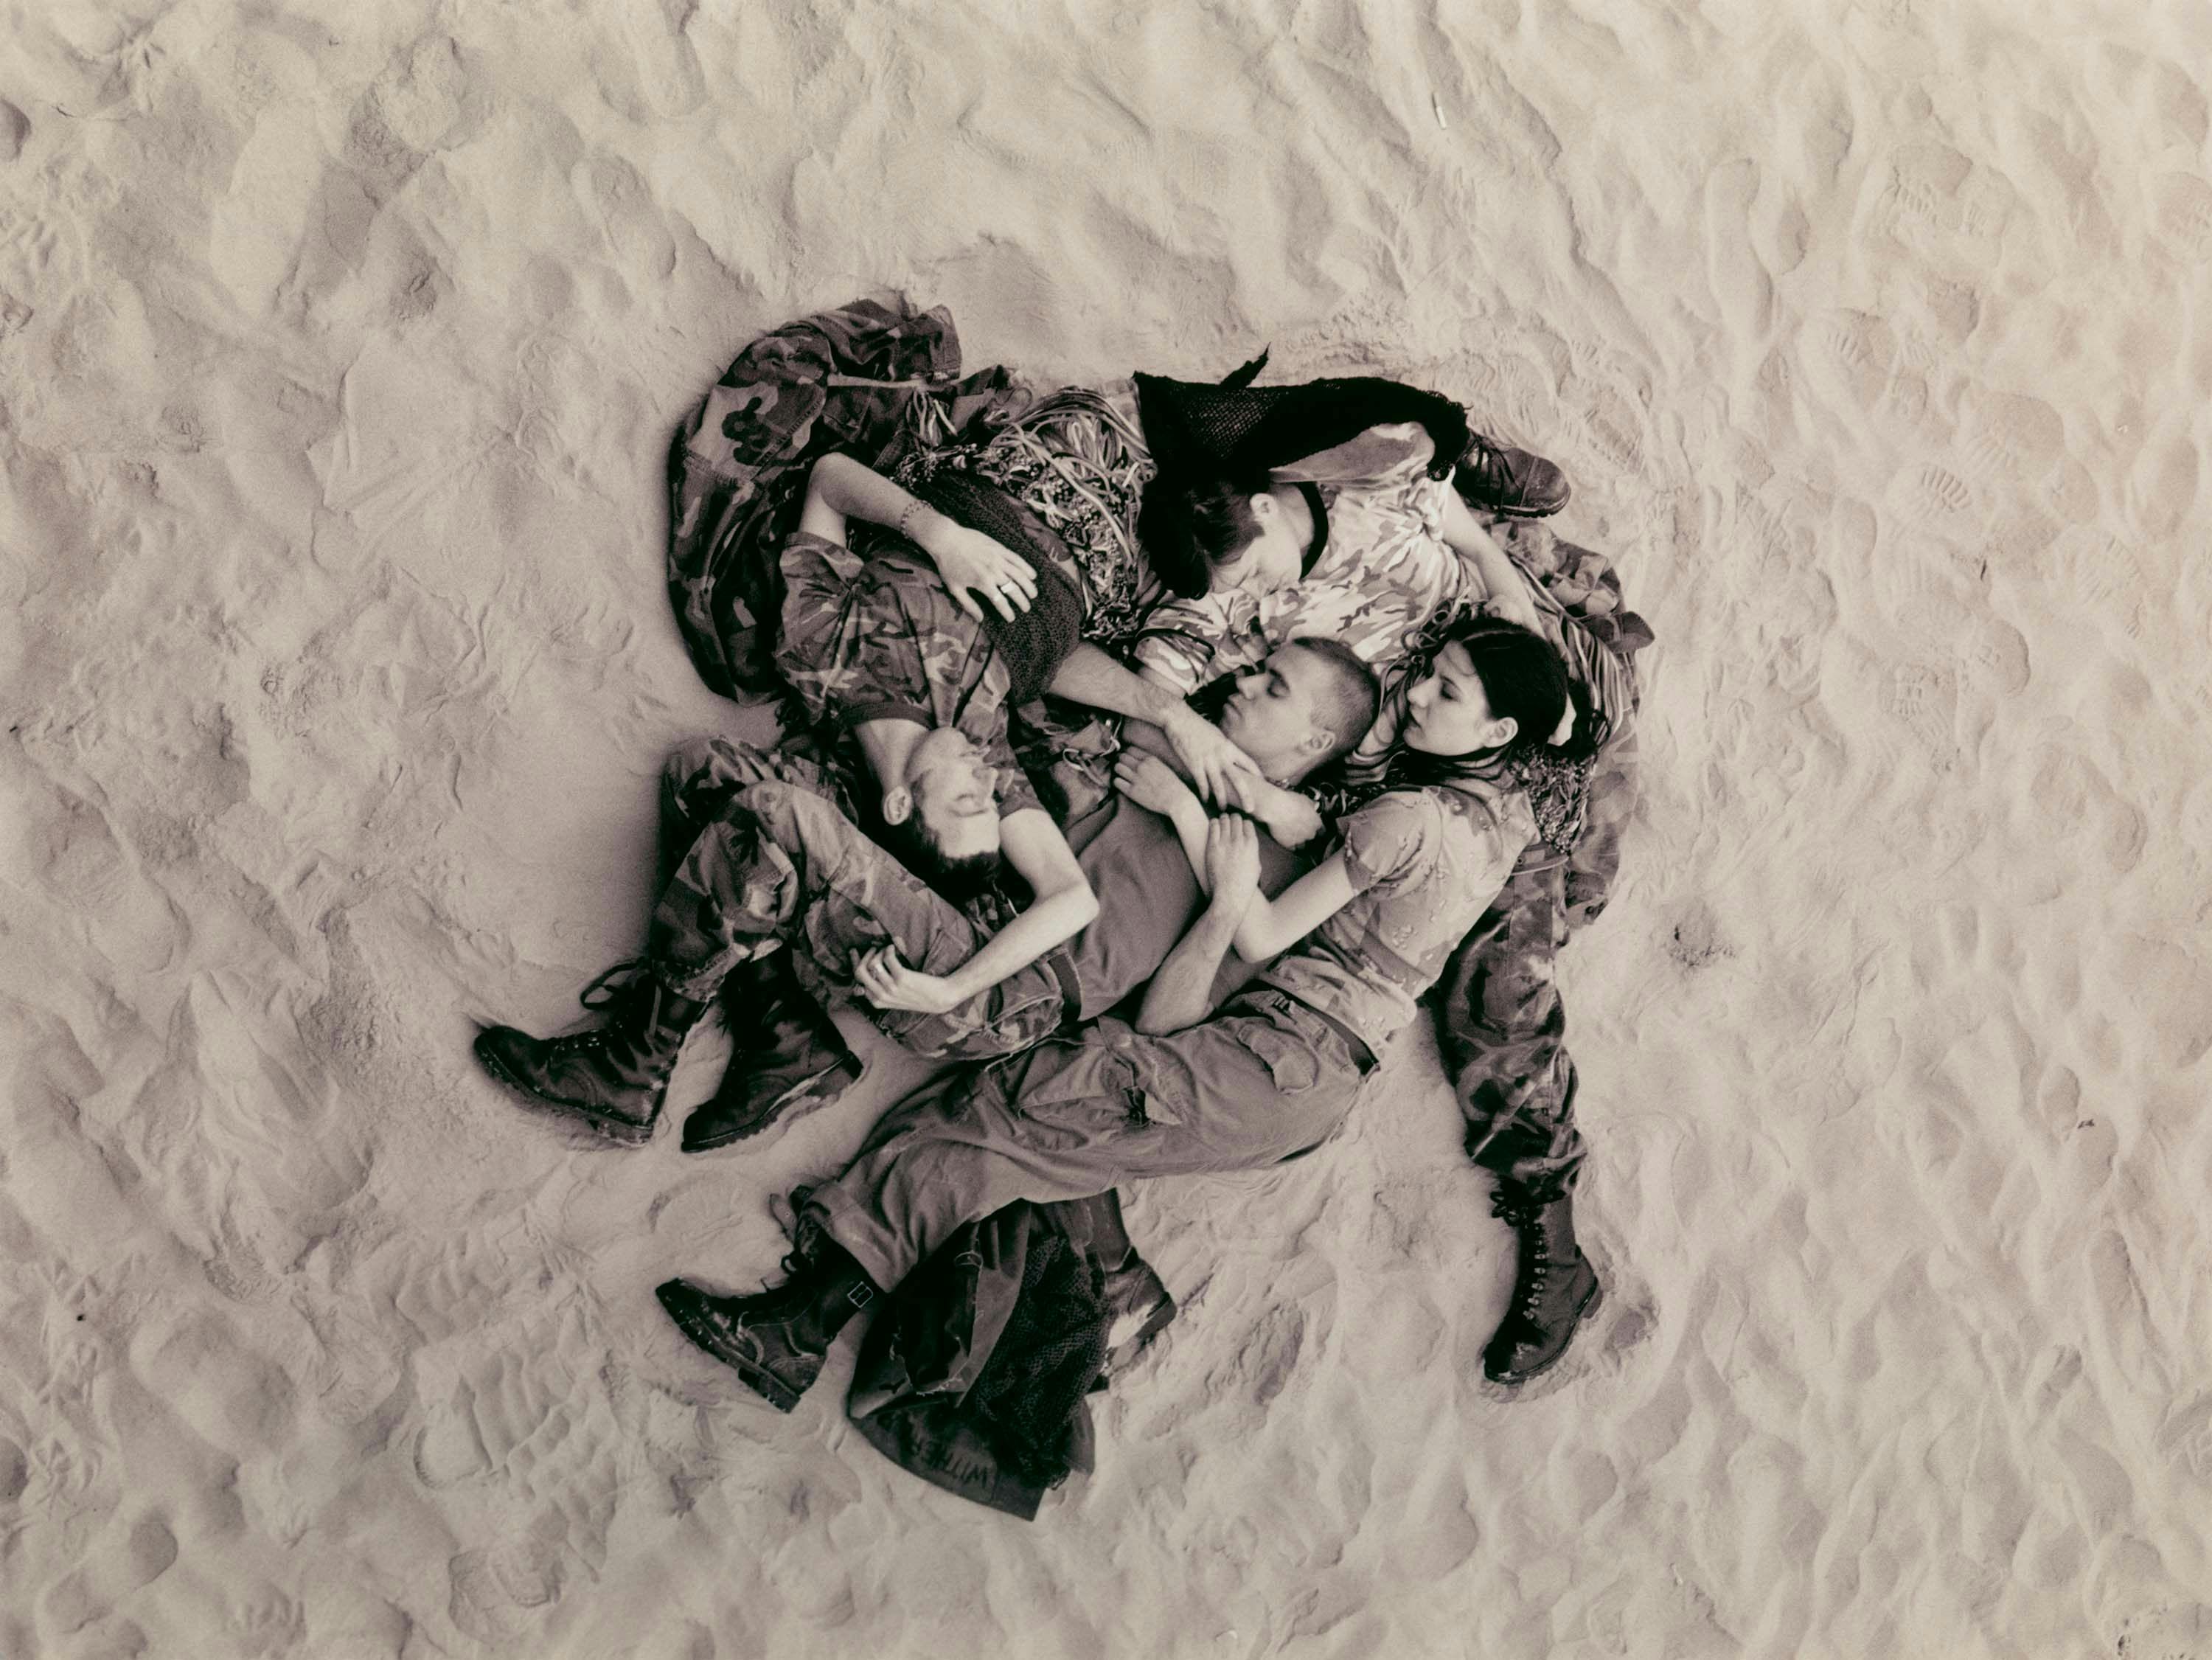 A photograph by Wolfgang Tillmans titled Lutz, Alex, Suzanne & Christoph on beach, dated 1993.